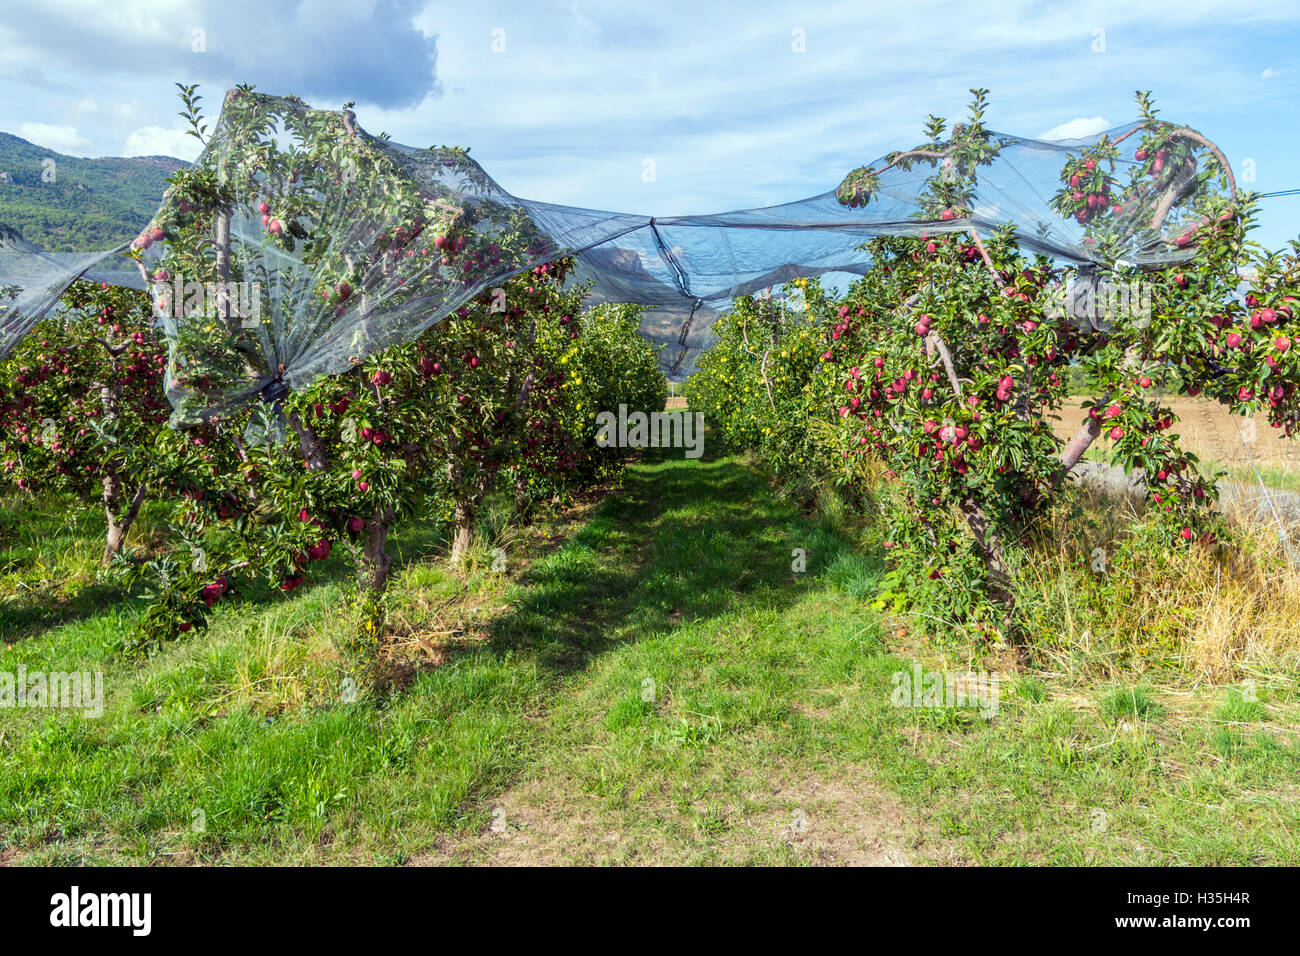 Red apples growing on trees under netting in orchard, southern France Stock Photo